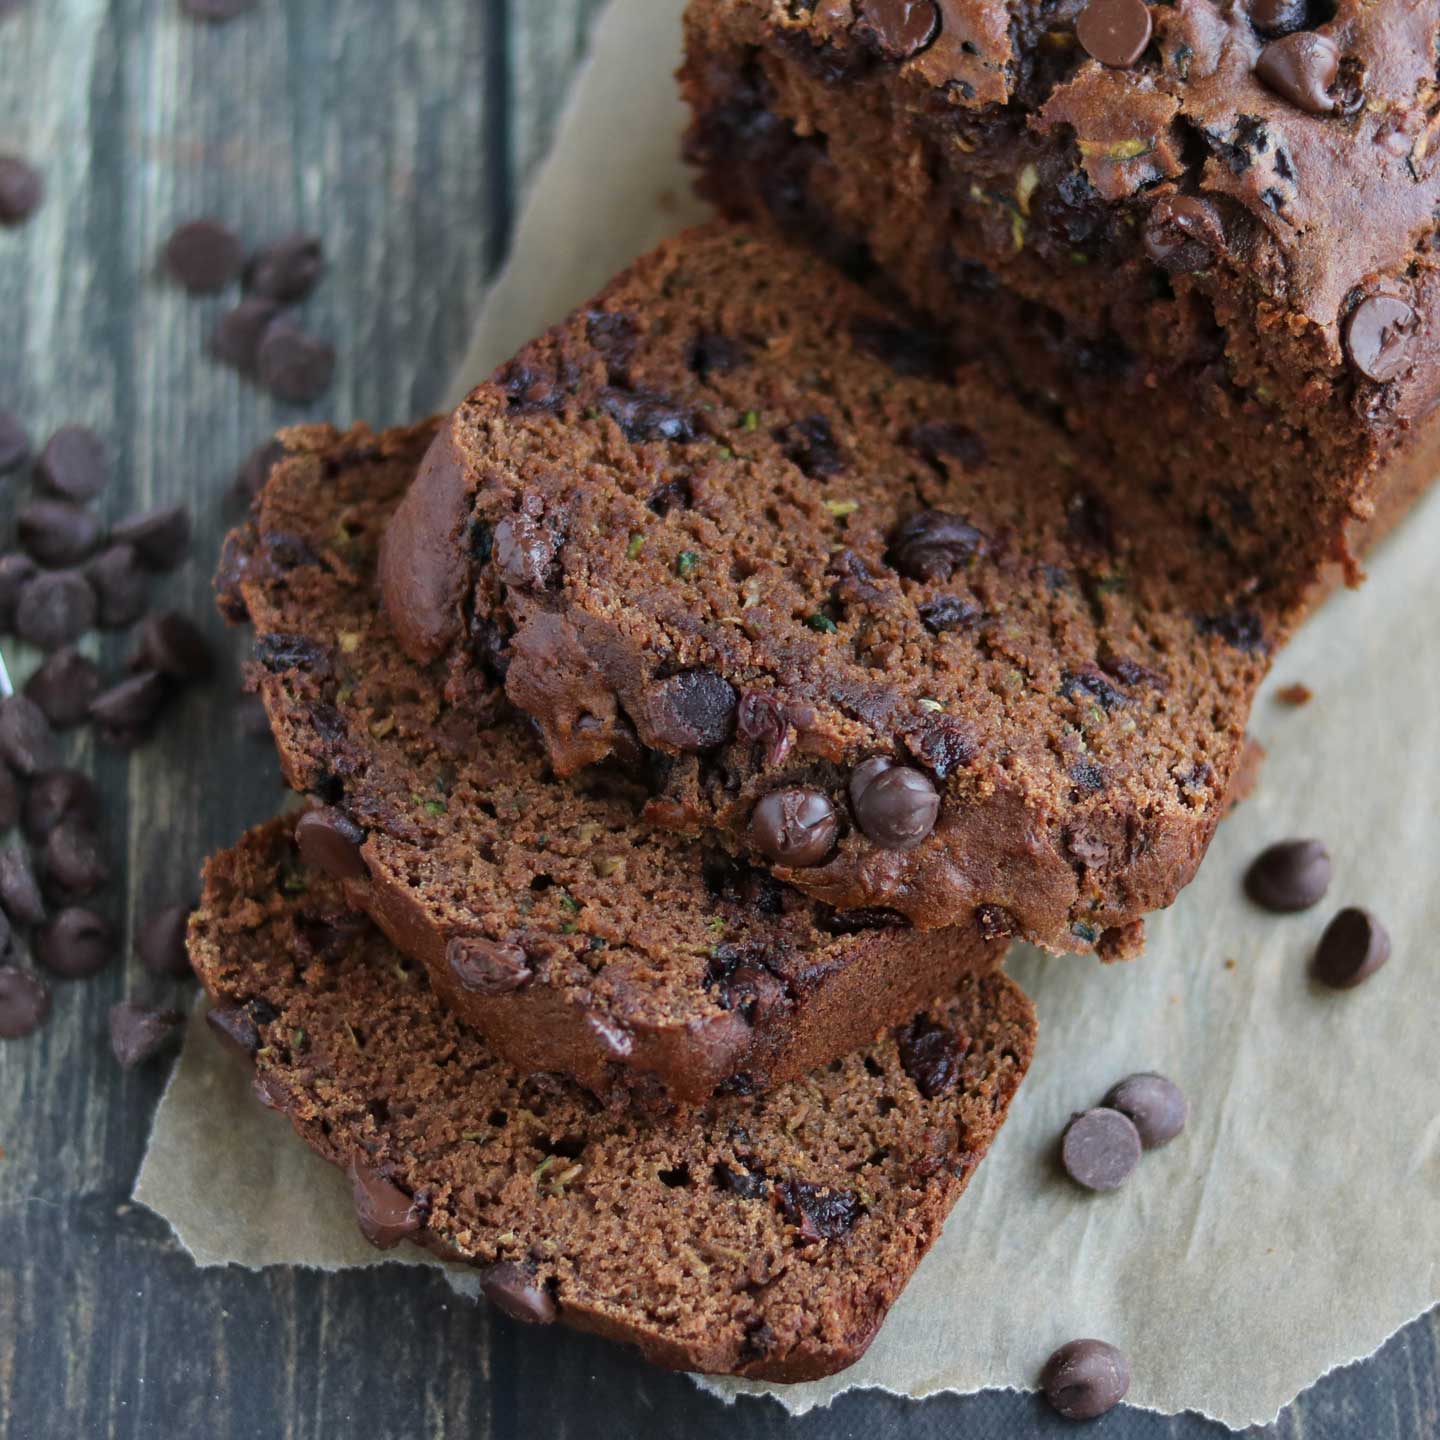 Luscious cherries & two layers of chocolate flavor! This decadent, rich Chocolate Zucchini Bread is dense, luxuriously moist, and studded with chocolate chips. Truly a chocolate lover's dream! And it’s a healthy zucchini bread recipe full of whole grains and very little extra fats! For quicker baking, this is a perfect zucchini muffin recipe, too! And this easy zucchini bread freezes beautifully – make a double batch to freeze for later, or to give as homemade gifts! | www.TwoHealthyKitchens.com